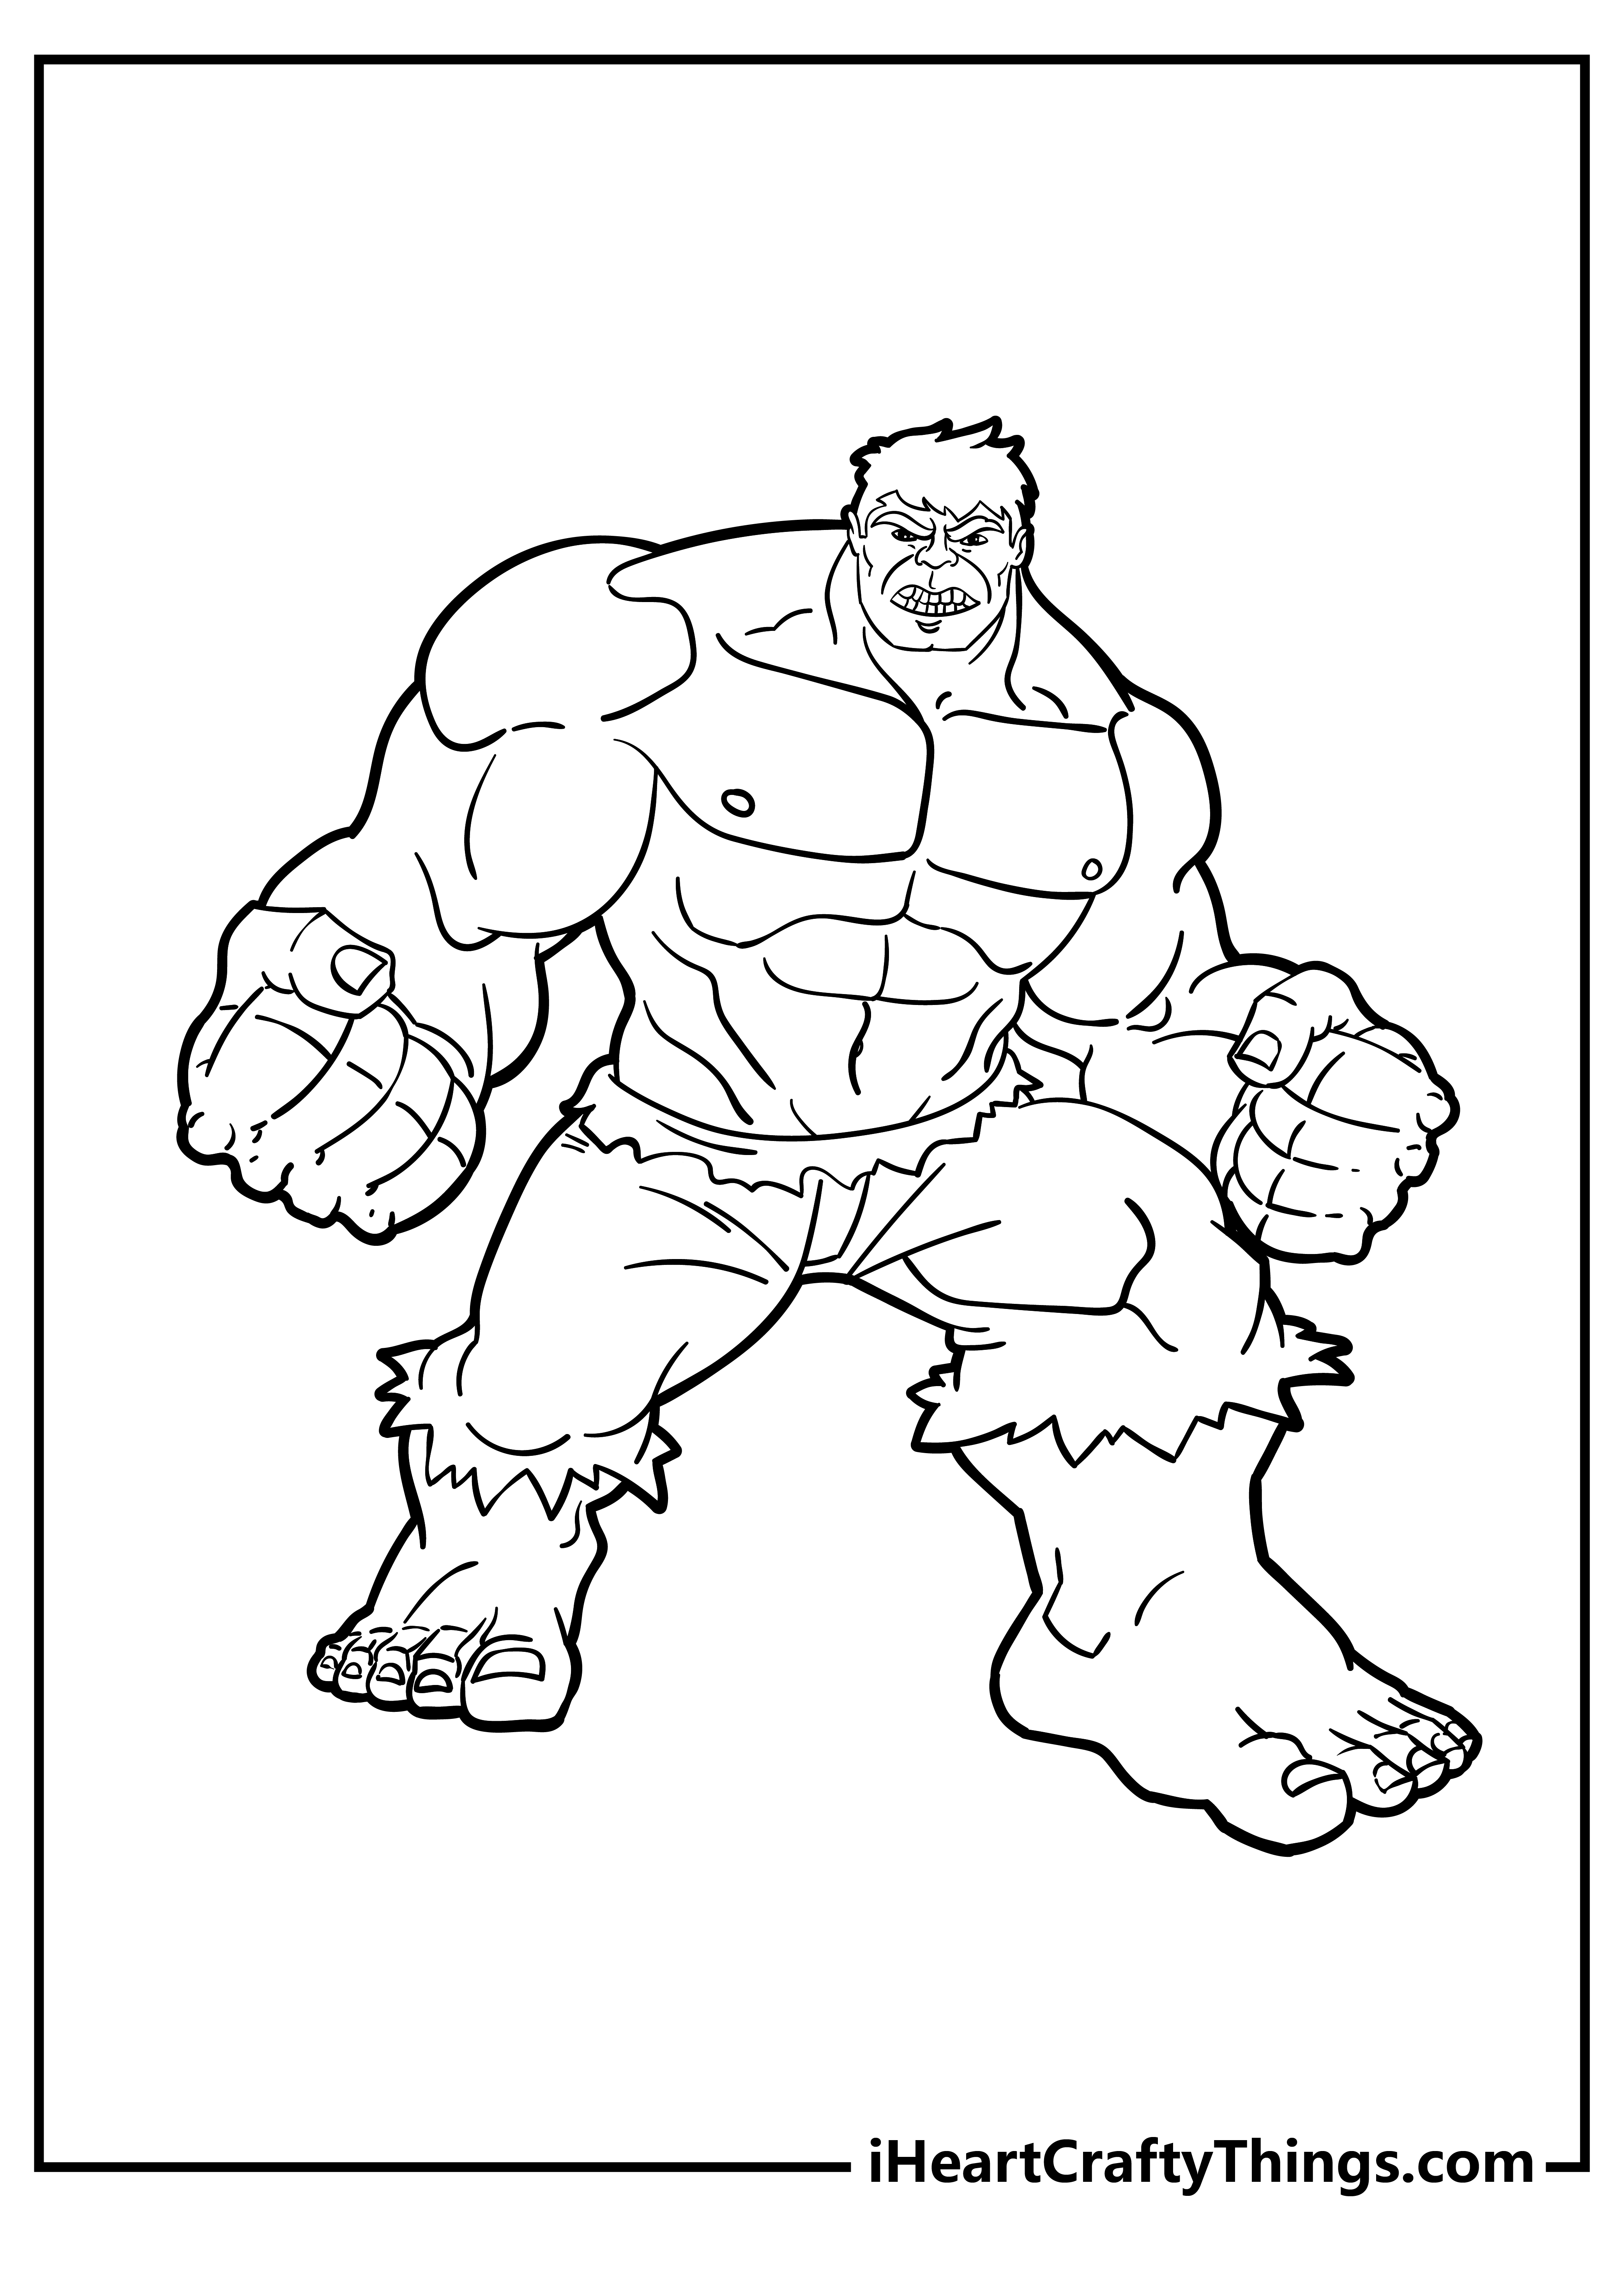 Hulk Coloring Pages for kids free download